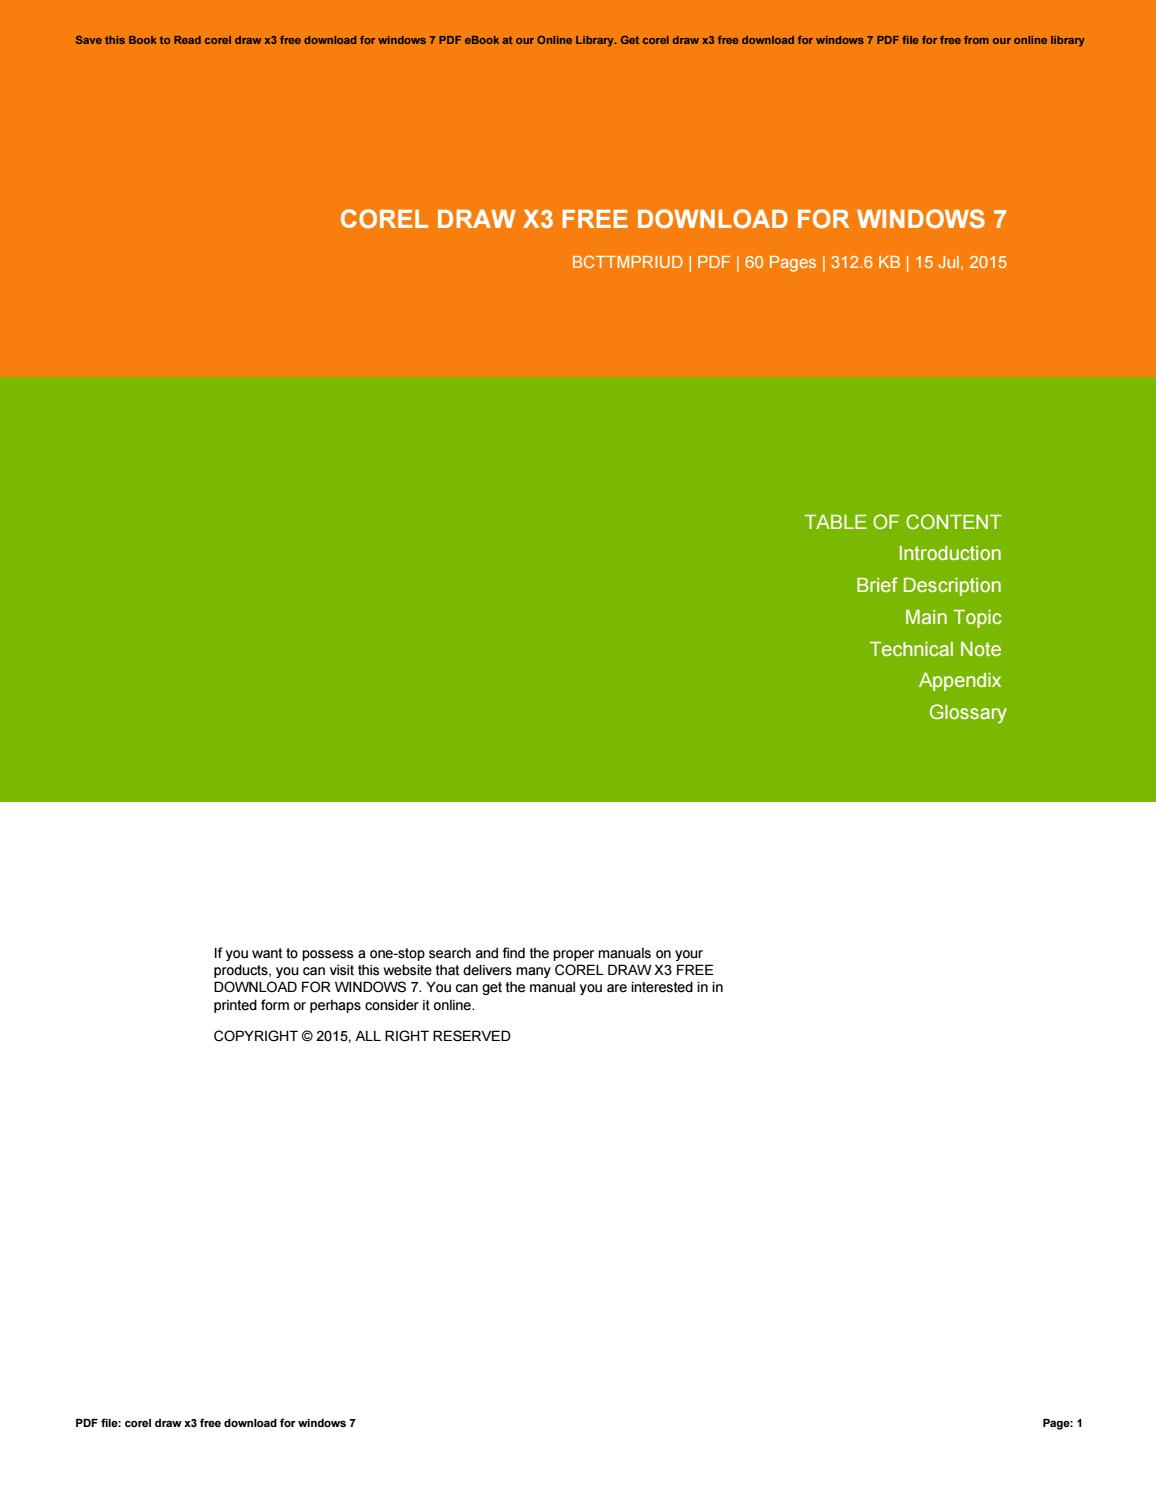 corel draw download free for windows 7